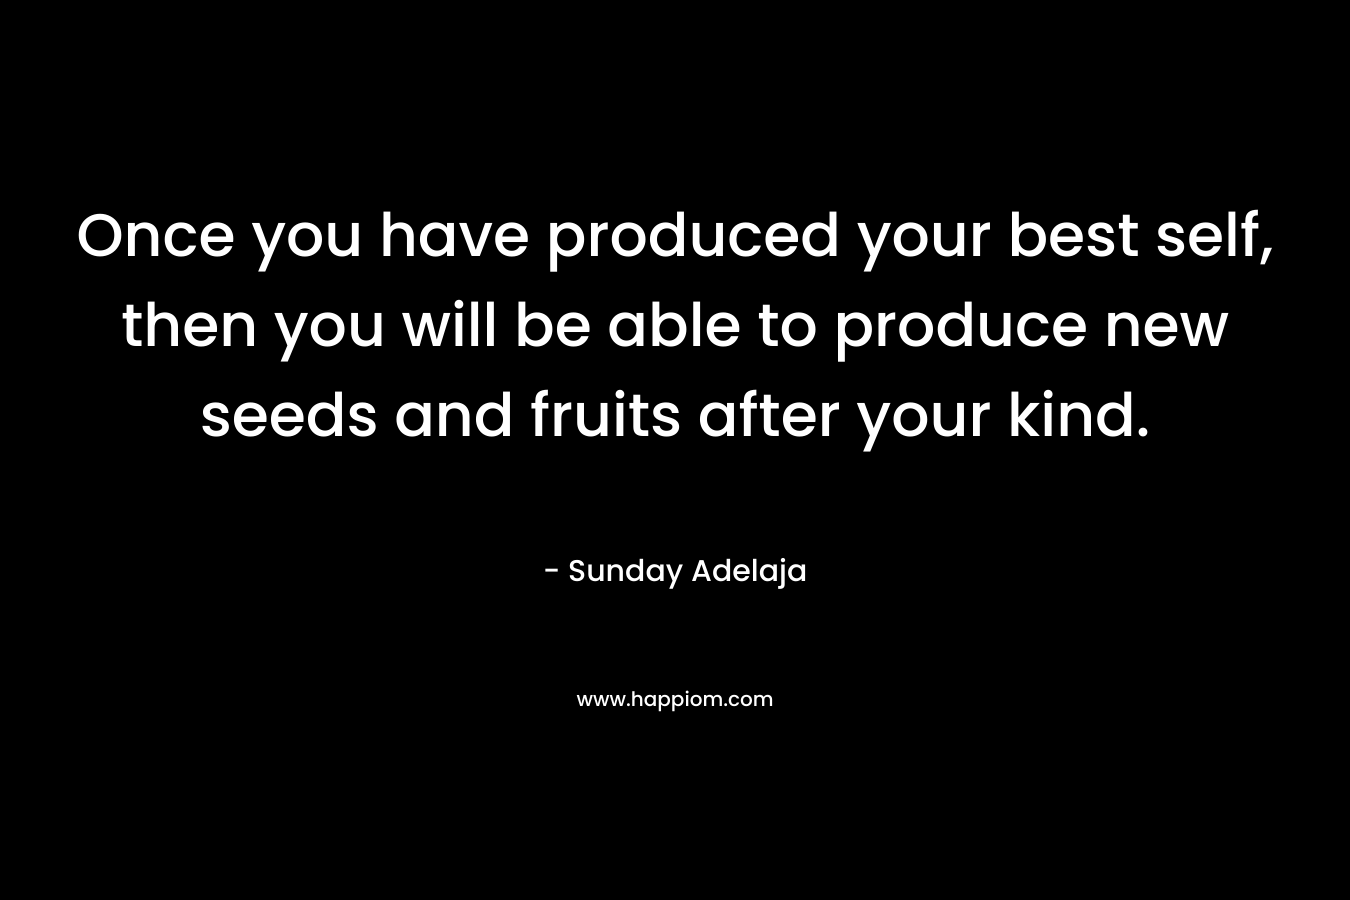 Once you have produced your best self, then you will be able to produce new seeds and fruits after your kind.